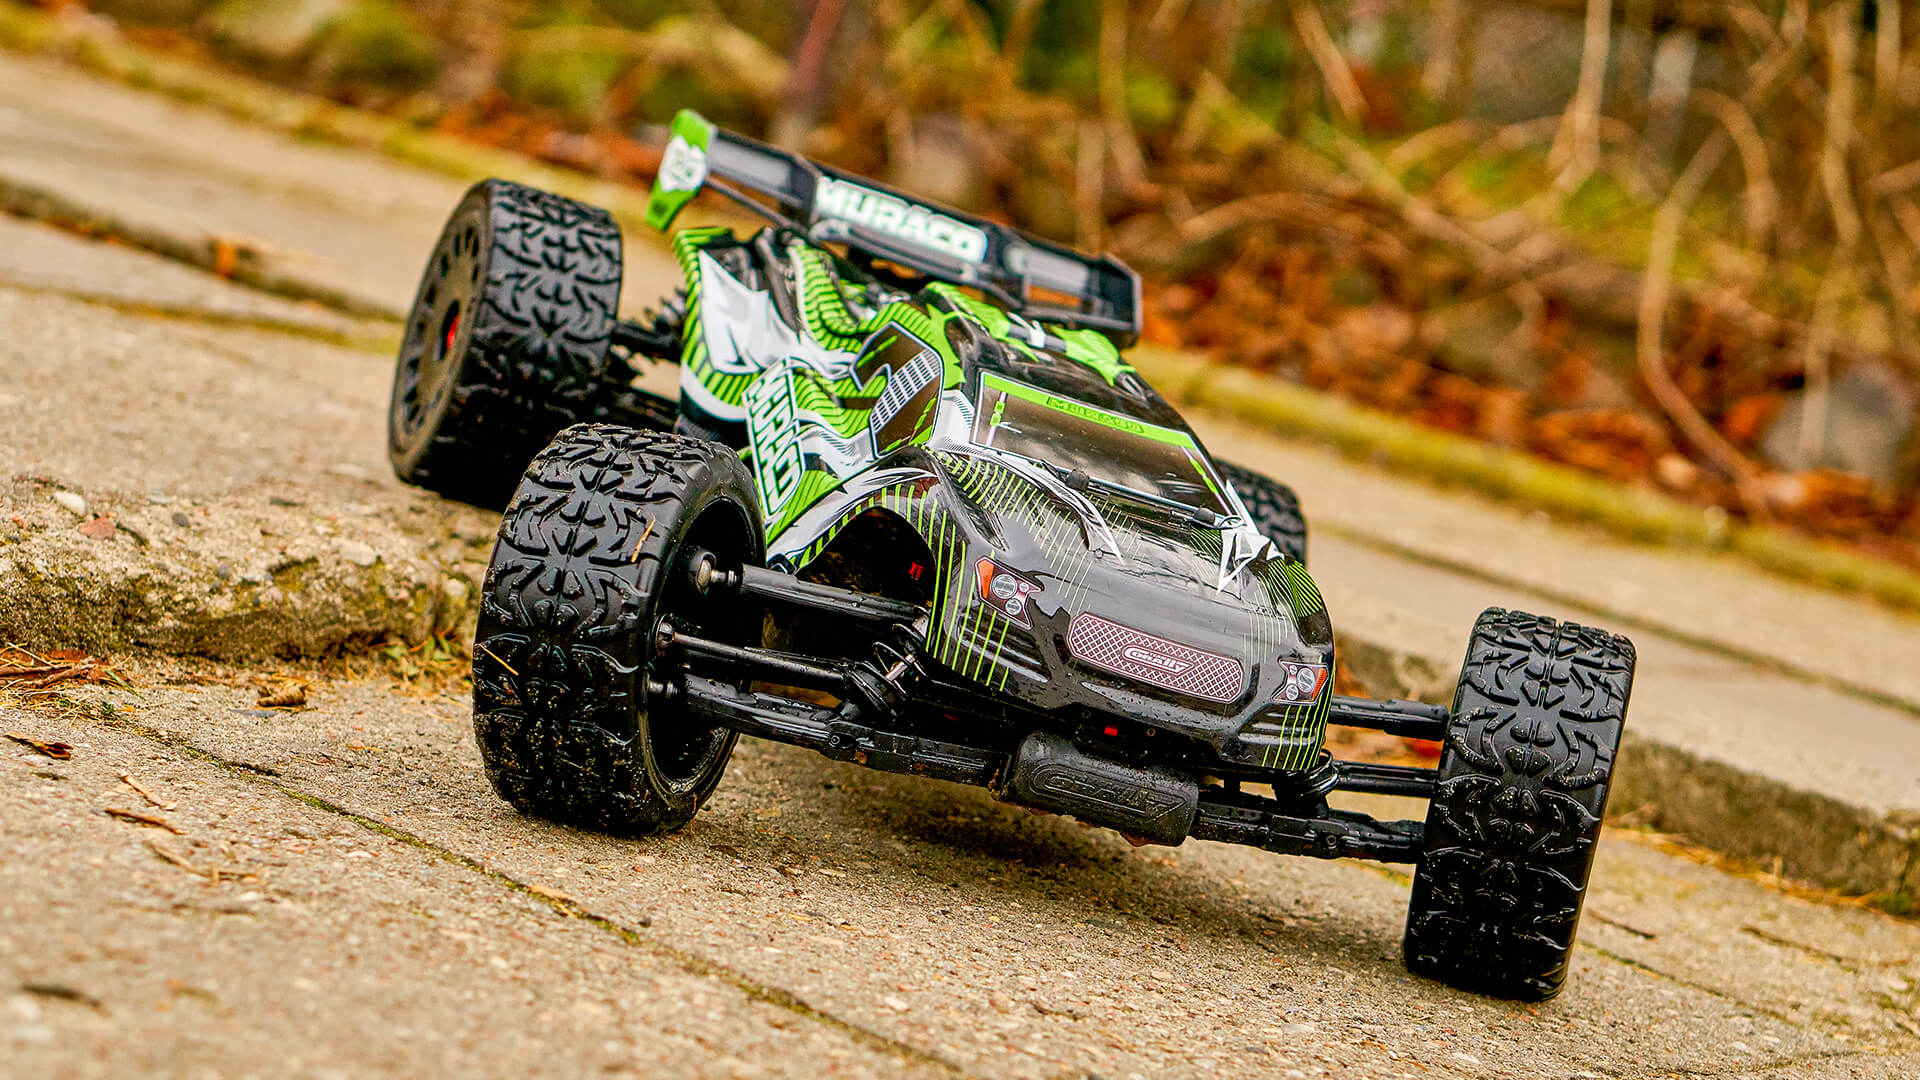 Team Corally - MURACO XP 6S - 1/8 Truggy LWB - RTR - Brushless Power 6S - No Battery - No Charger